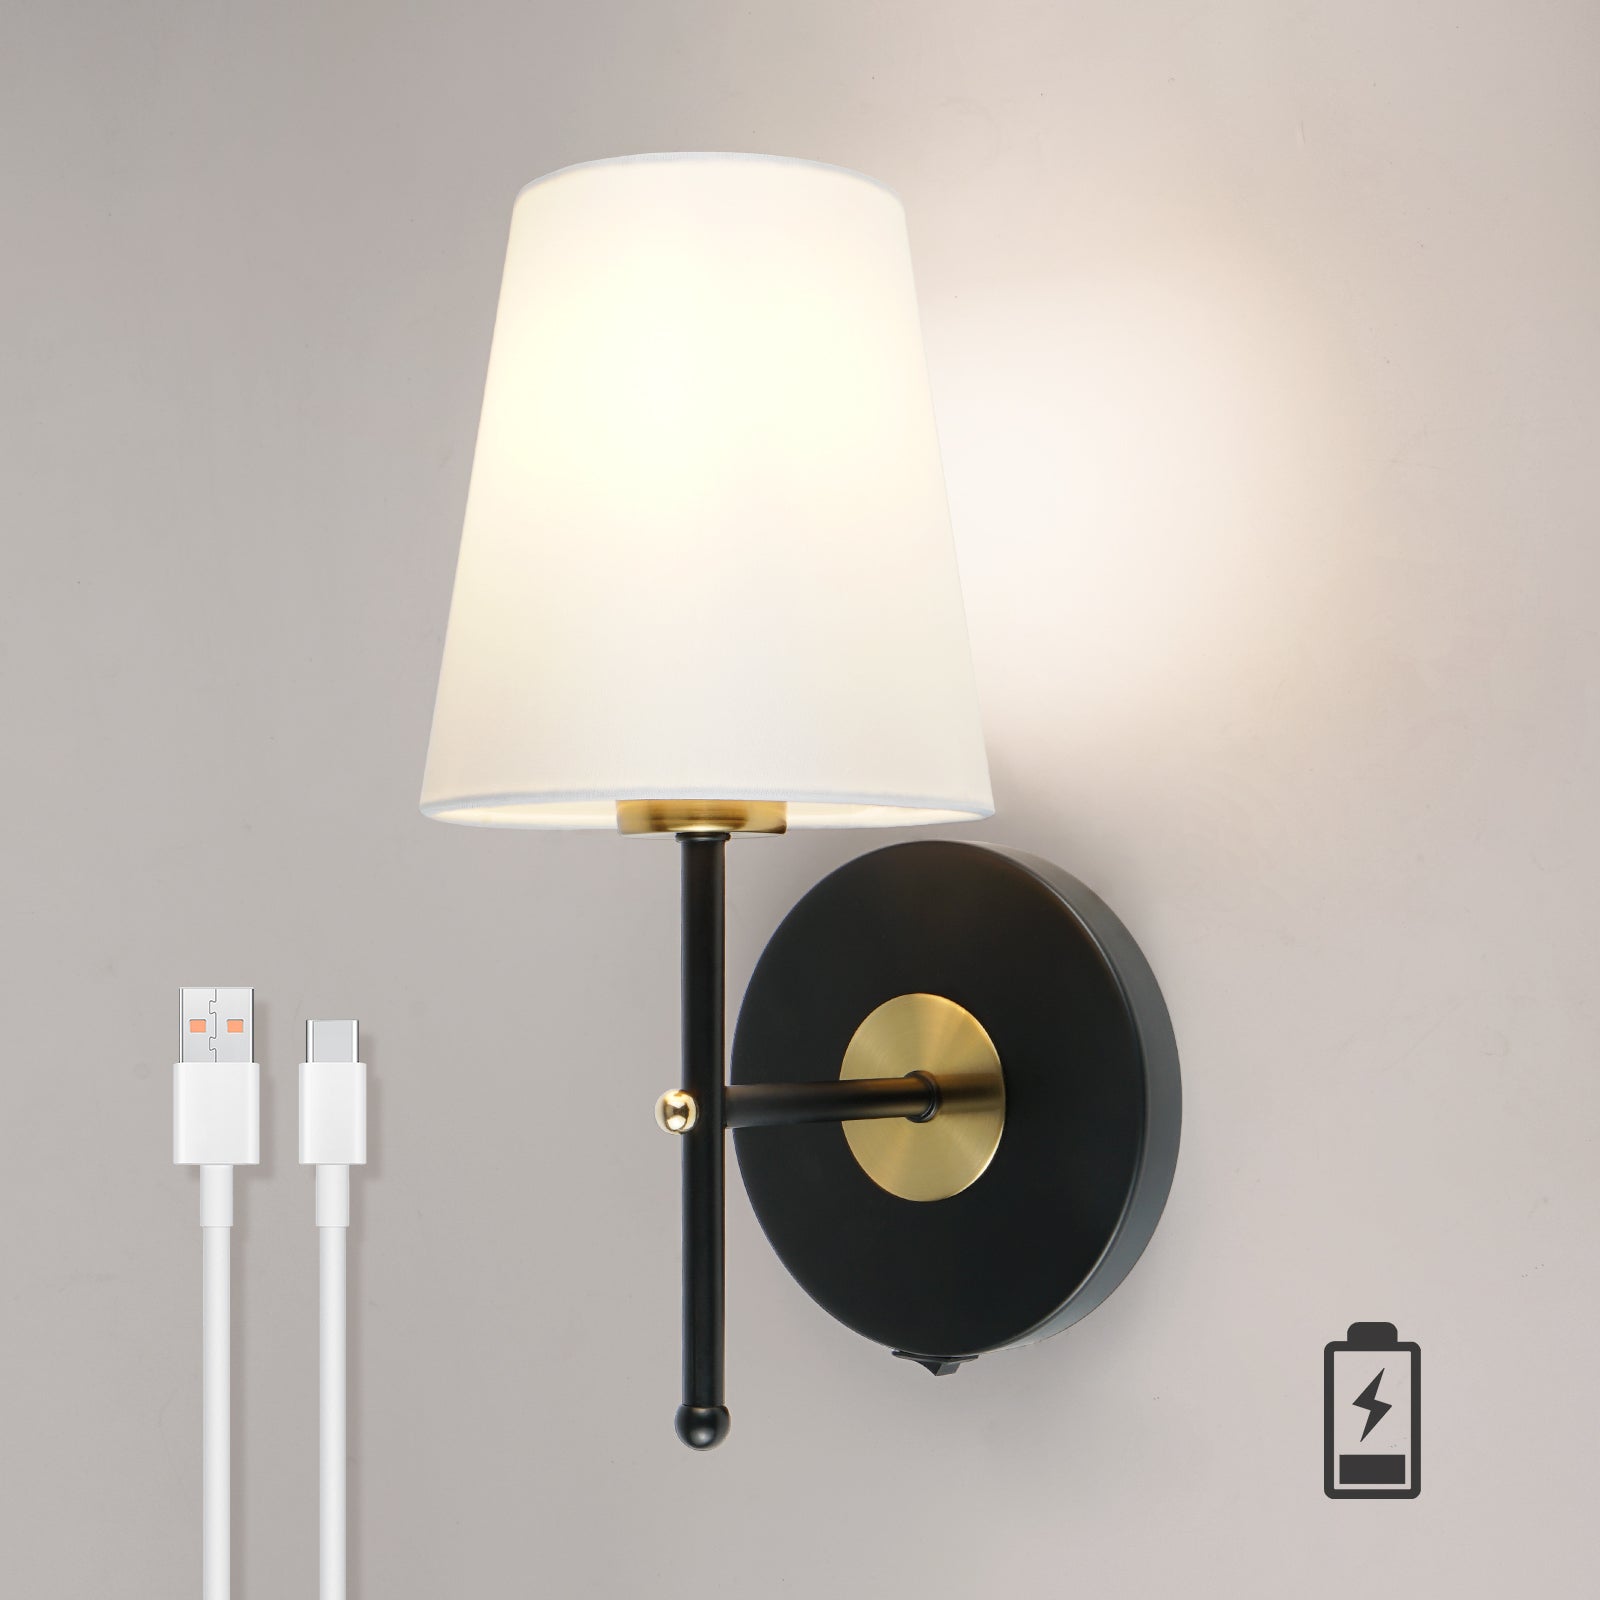 C01  Battery Charged Power Wall Sconce Wireless for Study Room